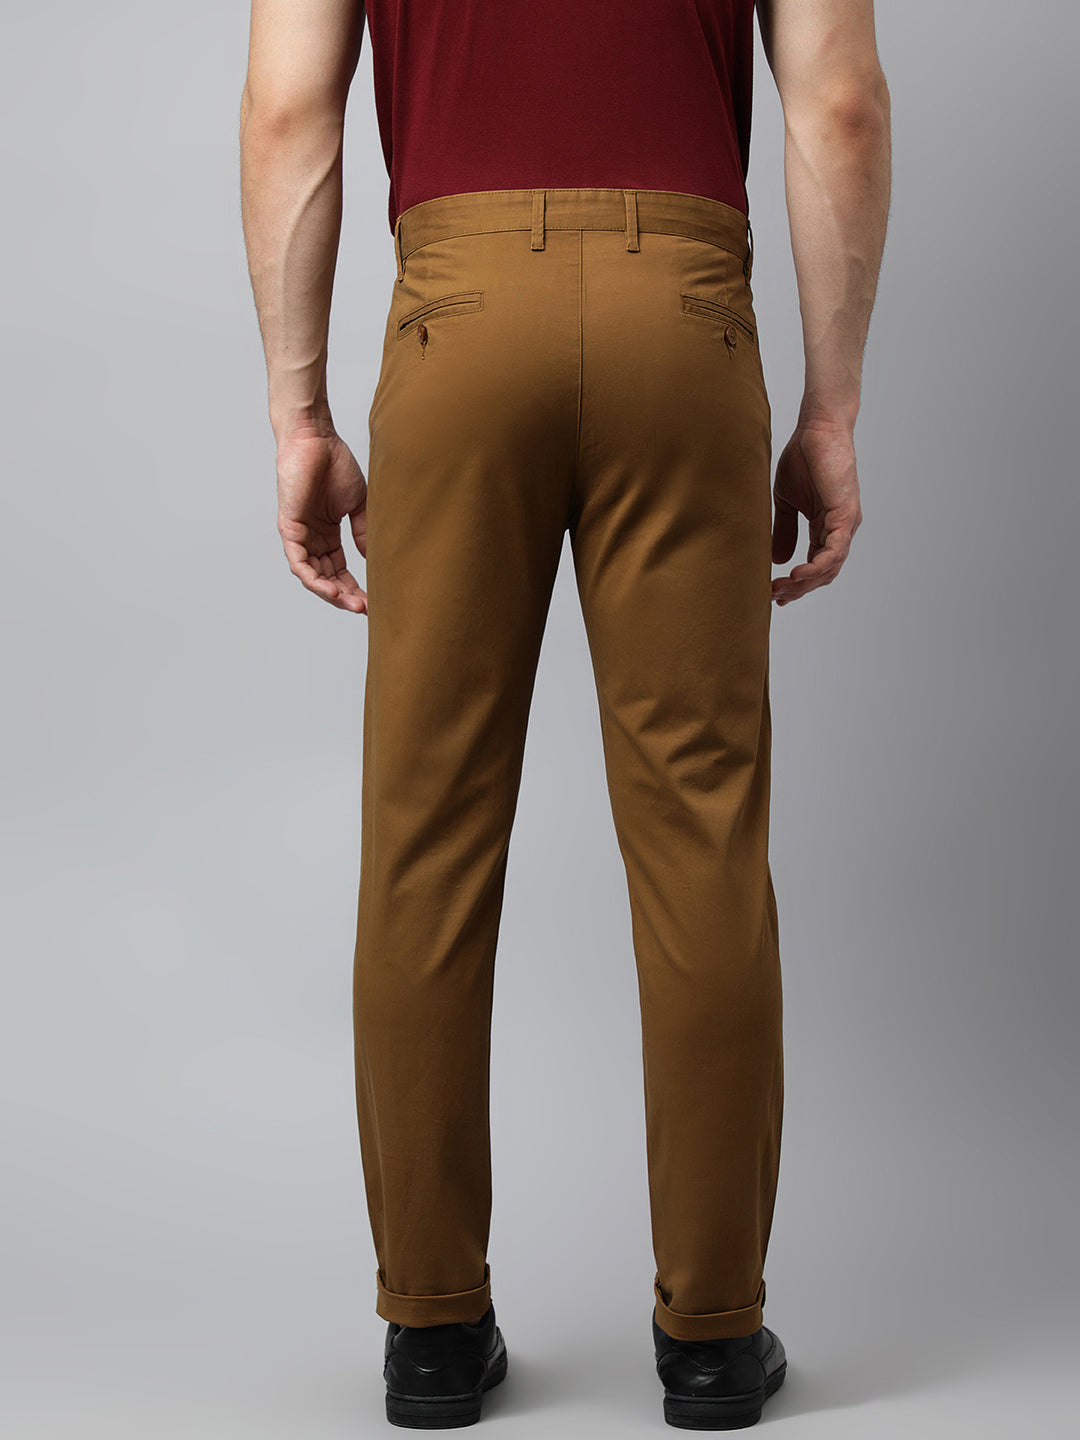 Buy Casual Trousers Online India Mens Workwear Trousers India Mens Casual  Pants  ottostorecom